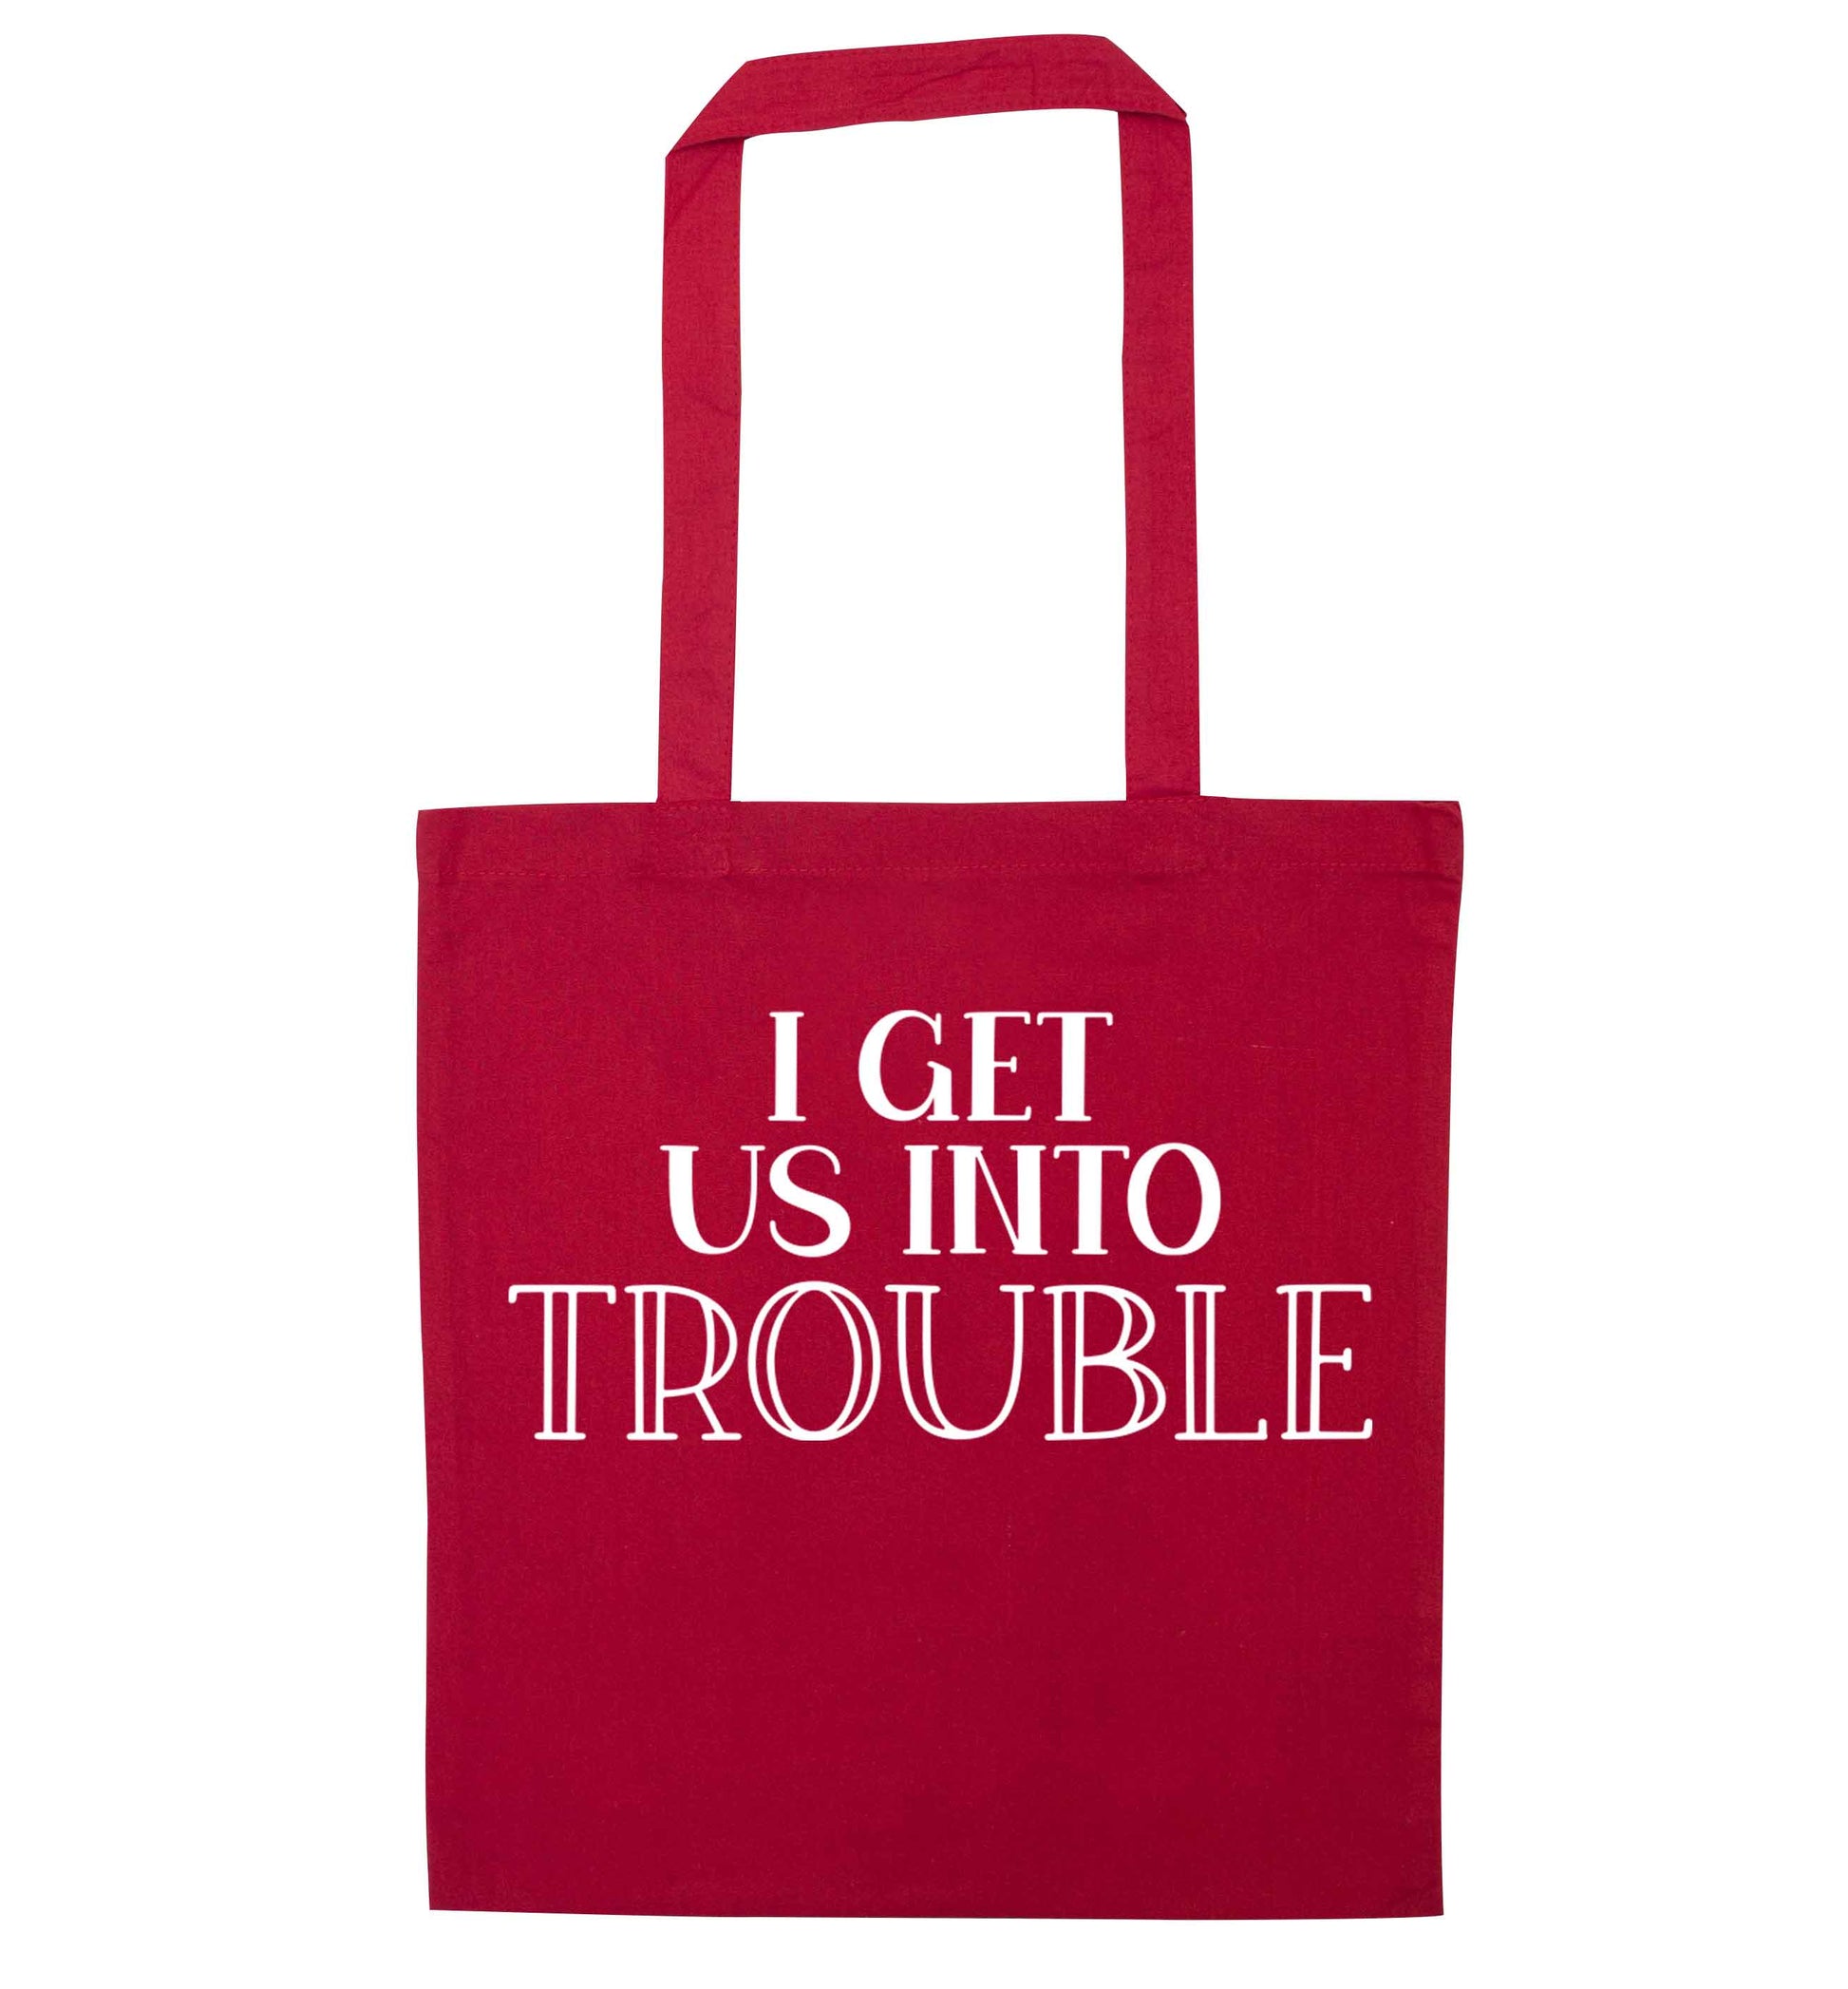 I get us into trouble red tote bag